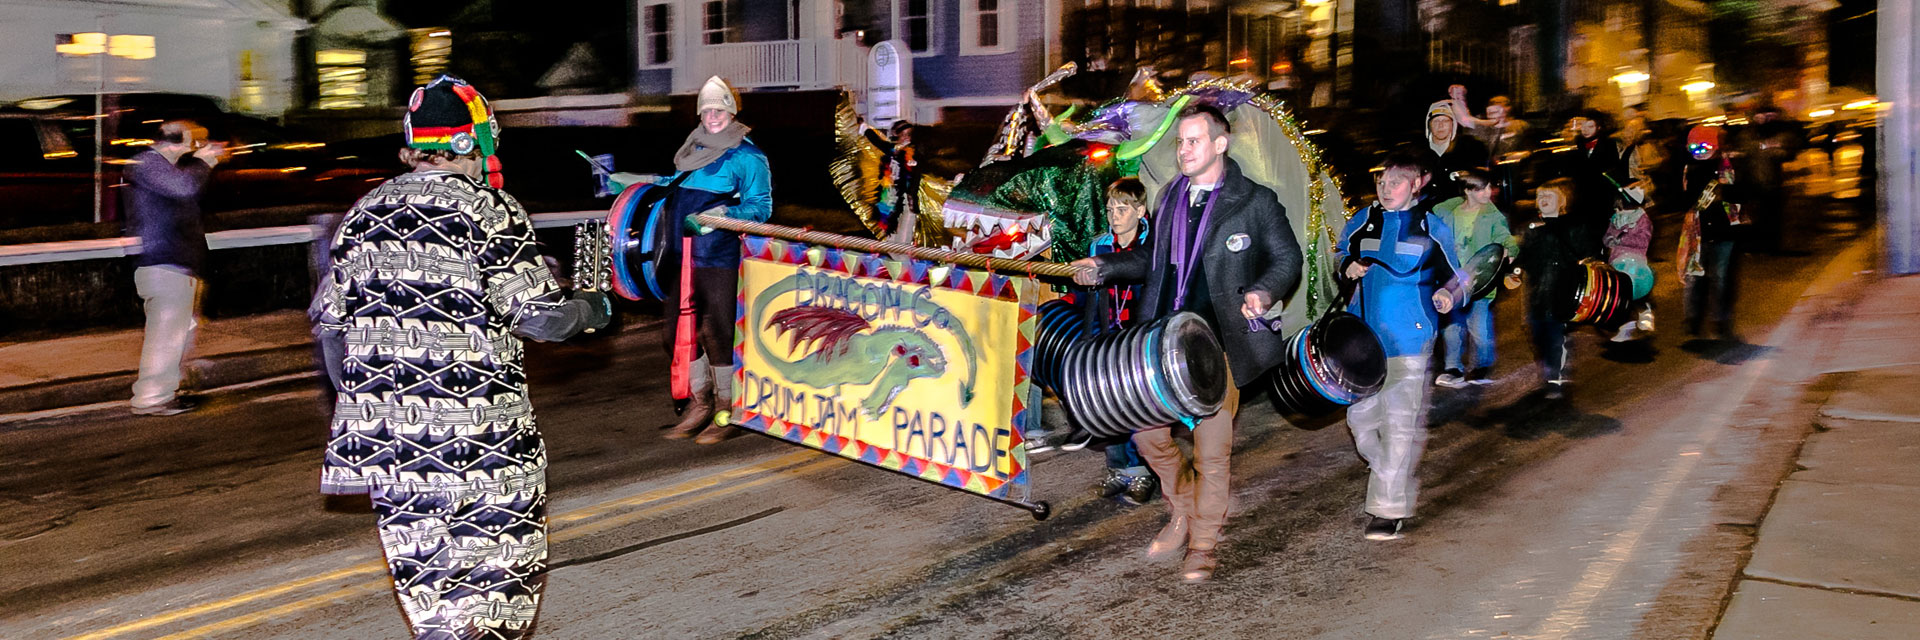 New Year's Eve Dragon Drum Parade